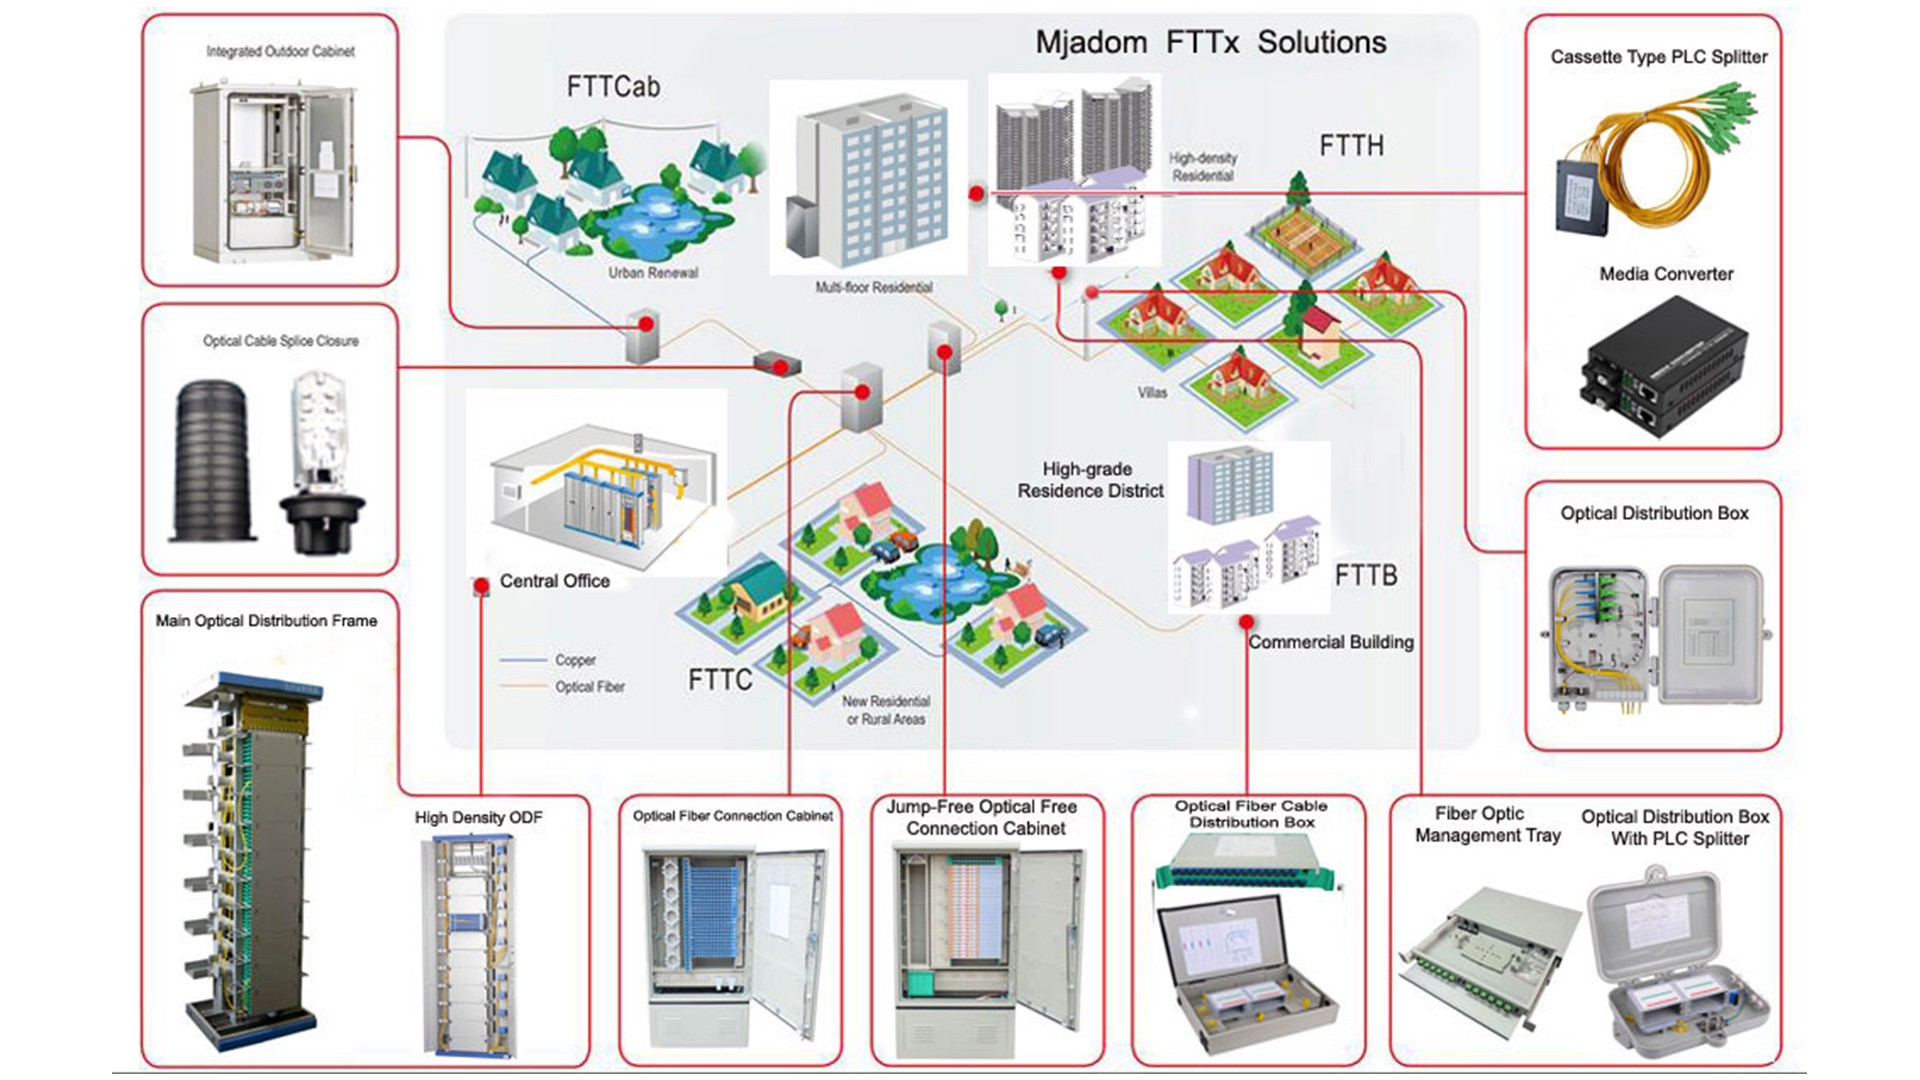 FTTH Solutions for commercial and residential